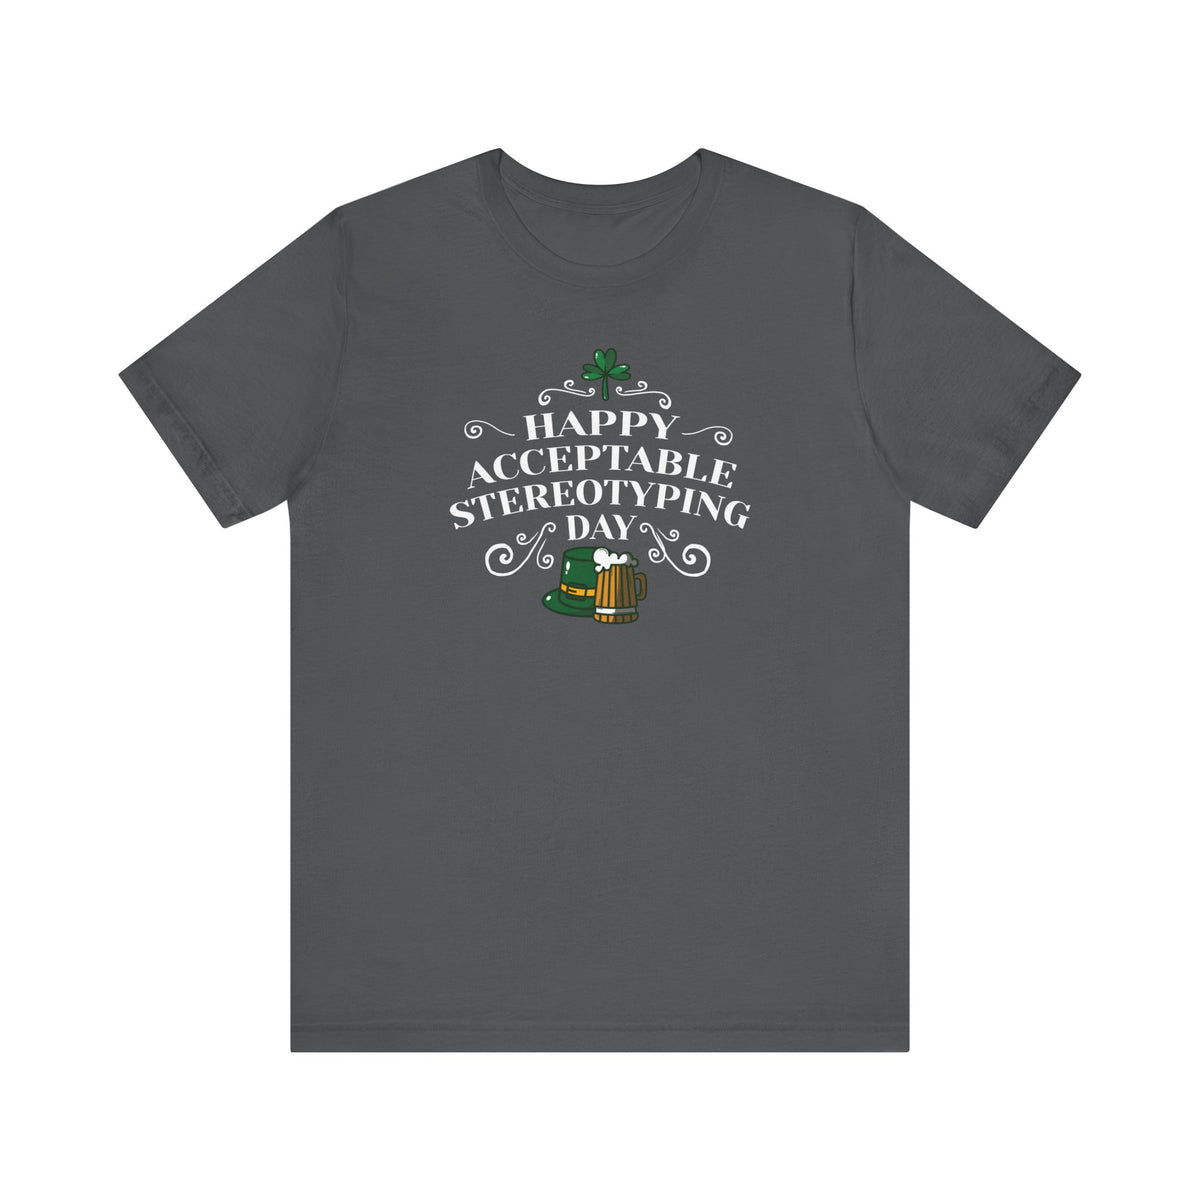 Happy Acceptable Stereotyping Day -  Men's T-Shirt